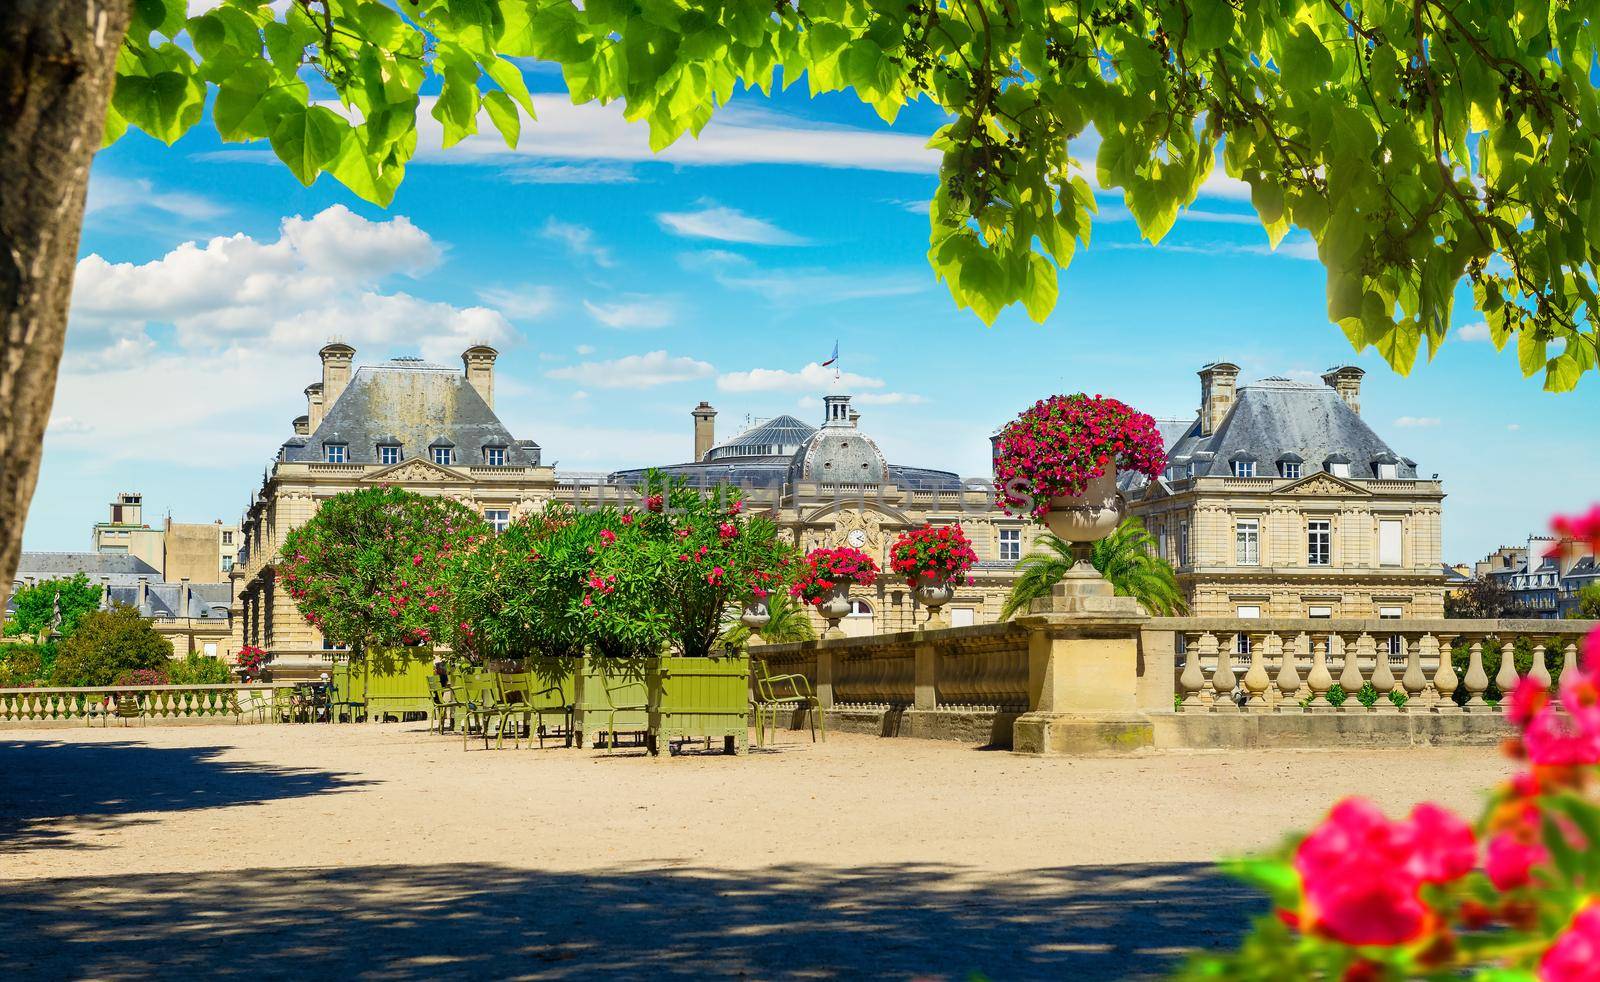 Luxembourg Palace and flower beds in summer, Paris